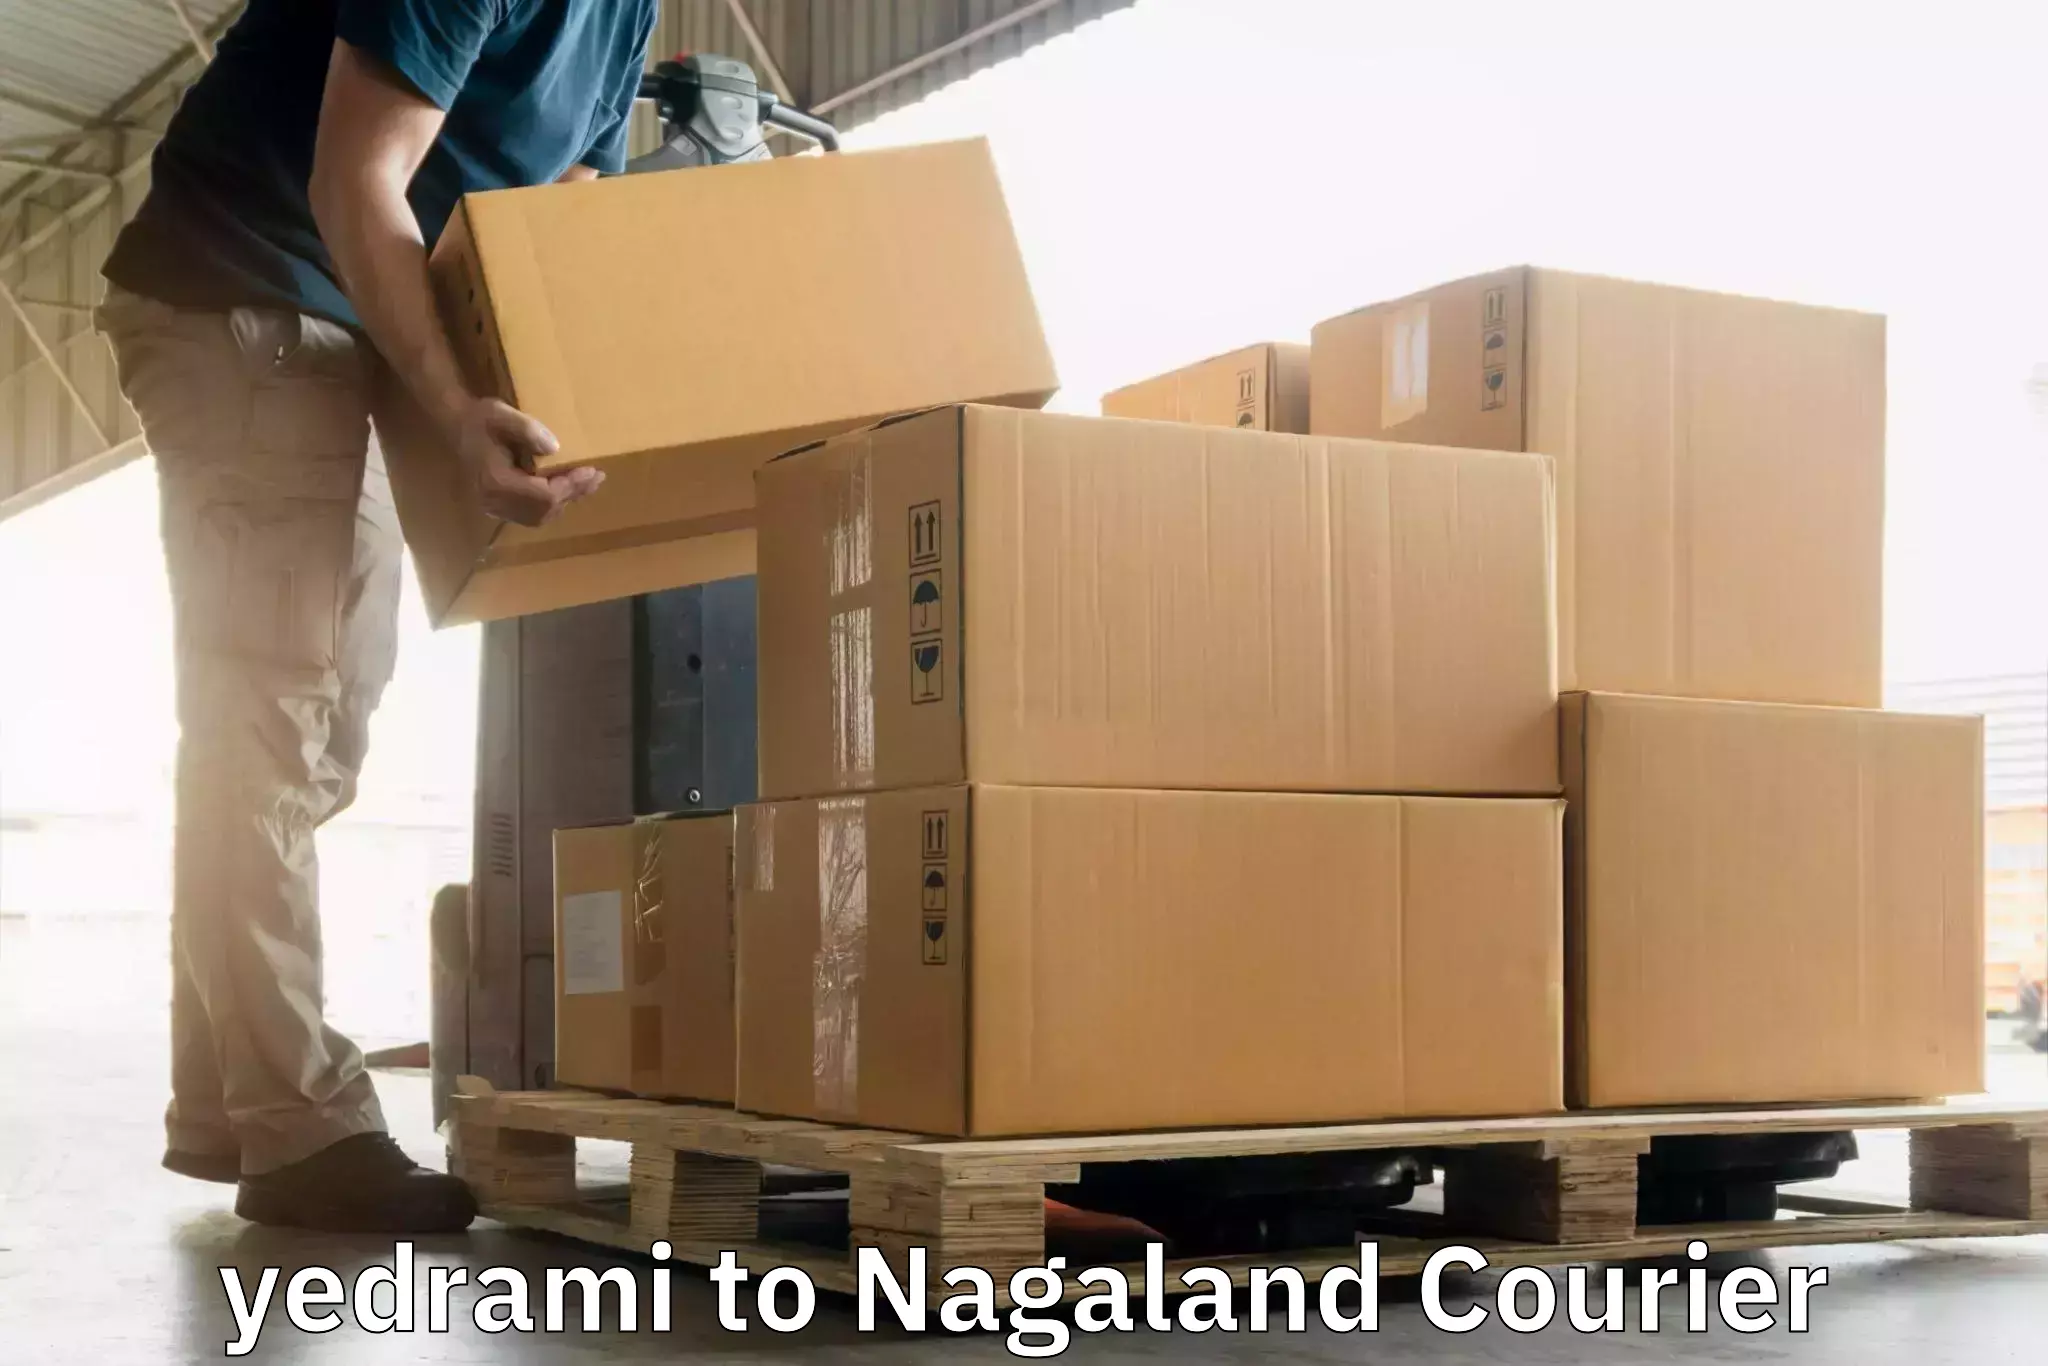 Specialized shipment handling in yedrami to Nagaland